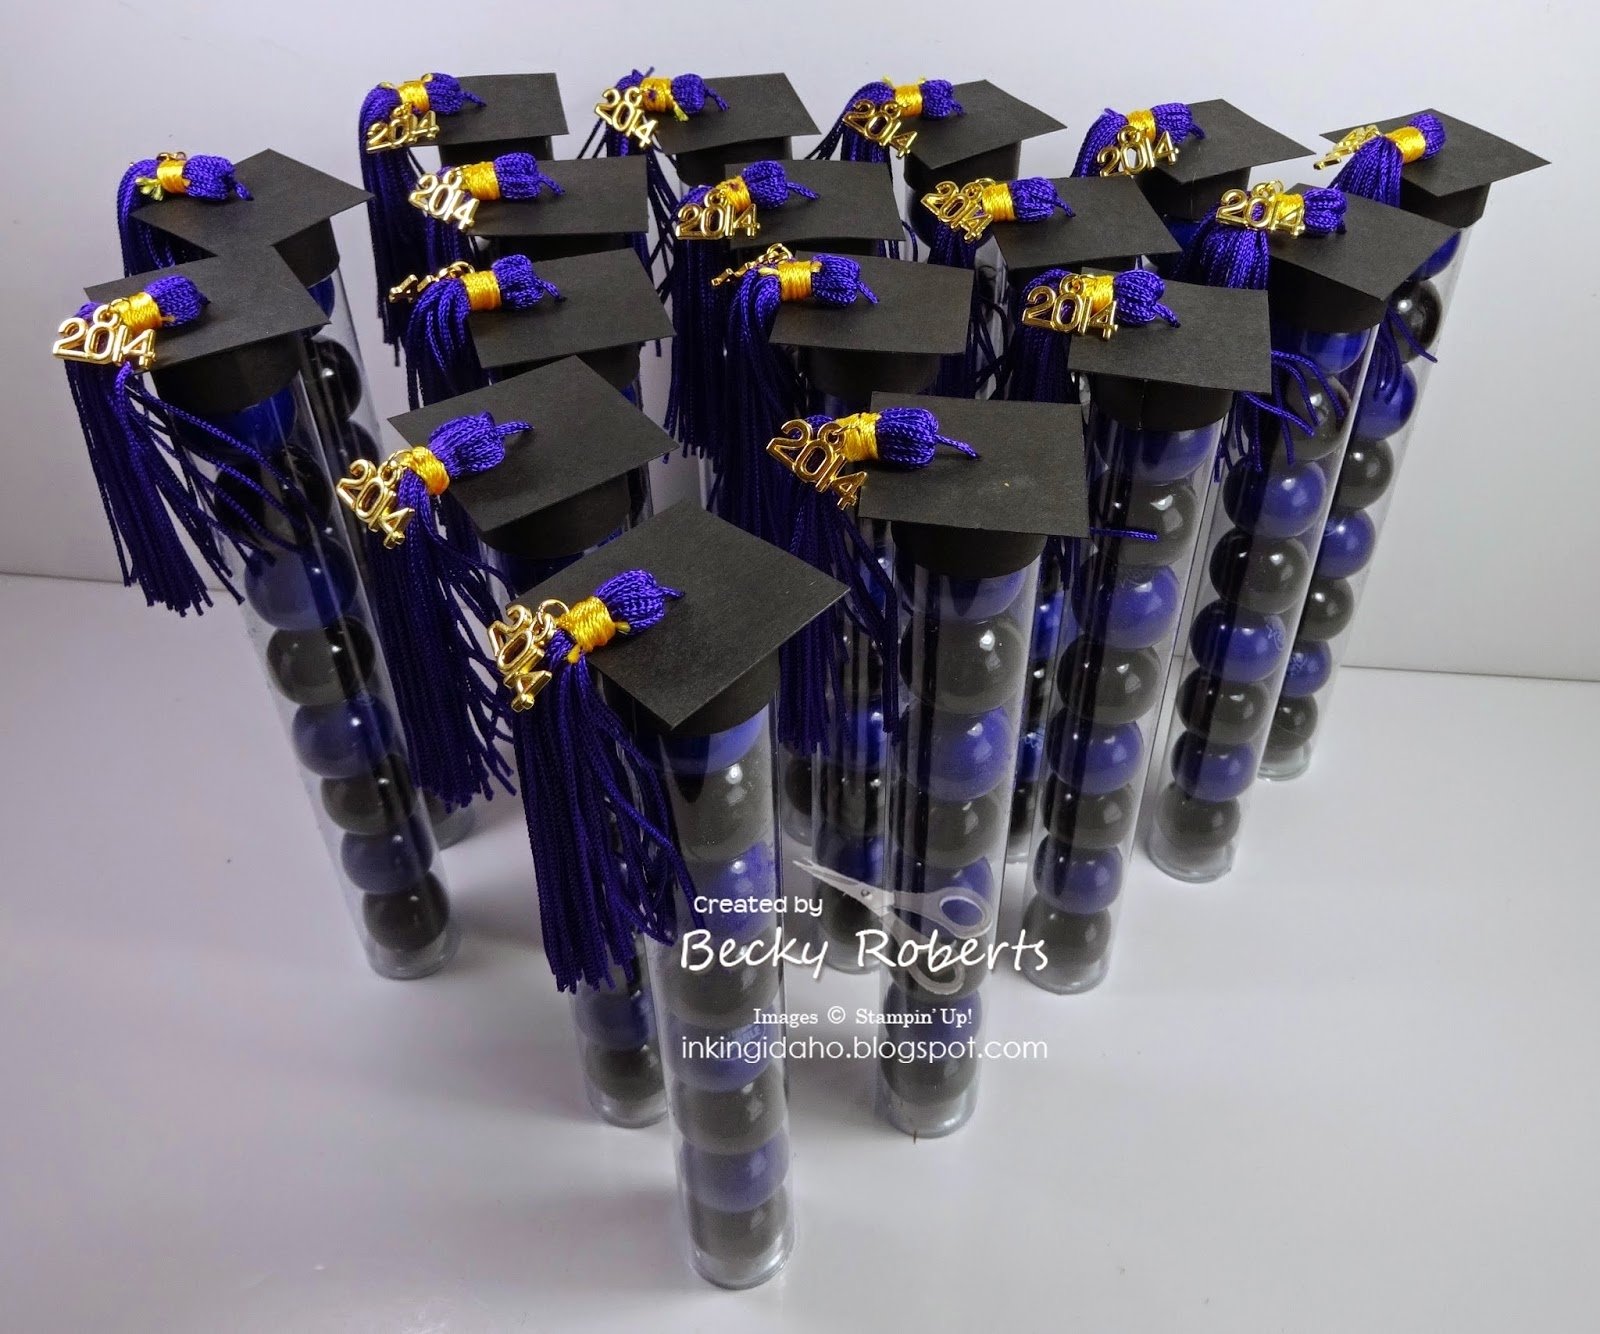 10 Awesome Graduation Party Ideas For Guys high school graduation party ideas for guys 17 best images about 1 2022